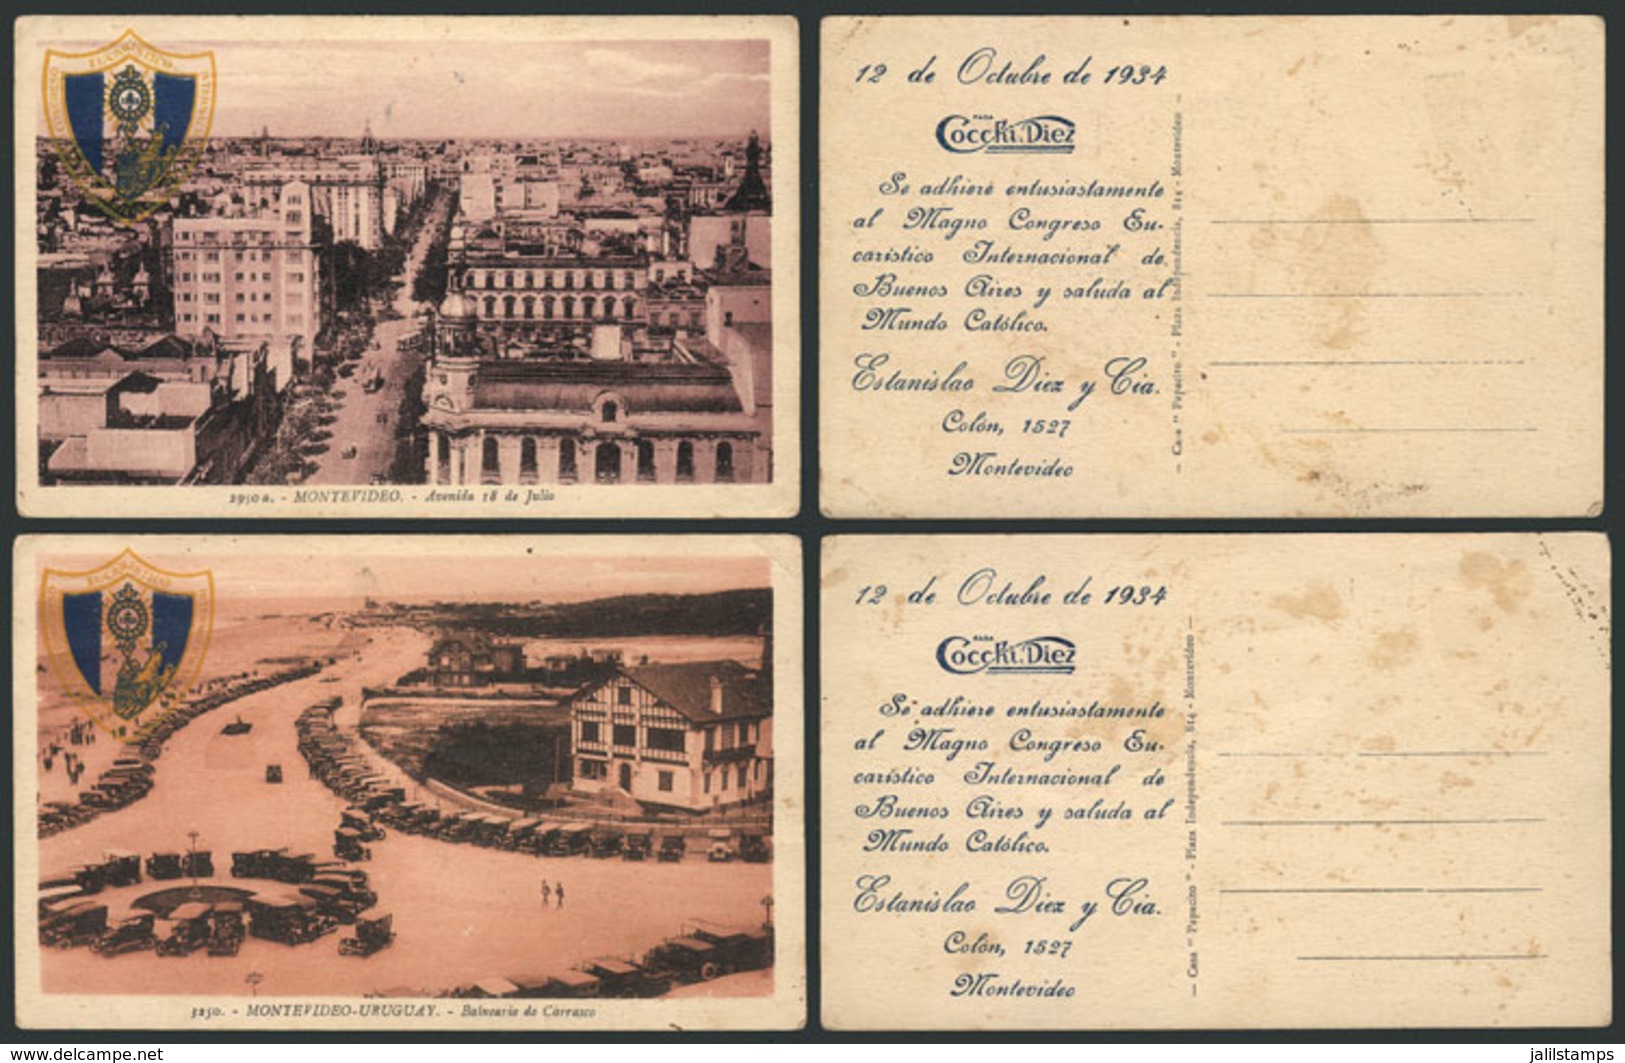 1599 URUGUAY: MONTEVIDEO: 2 PCs With Advertising On Reverse For Casa Cocchi Diez, For The - Uruguay